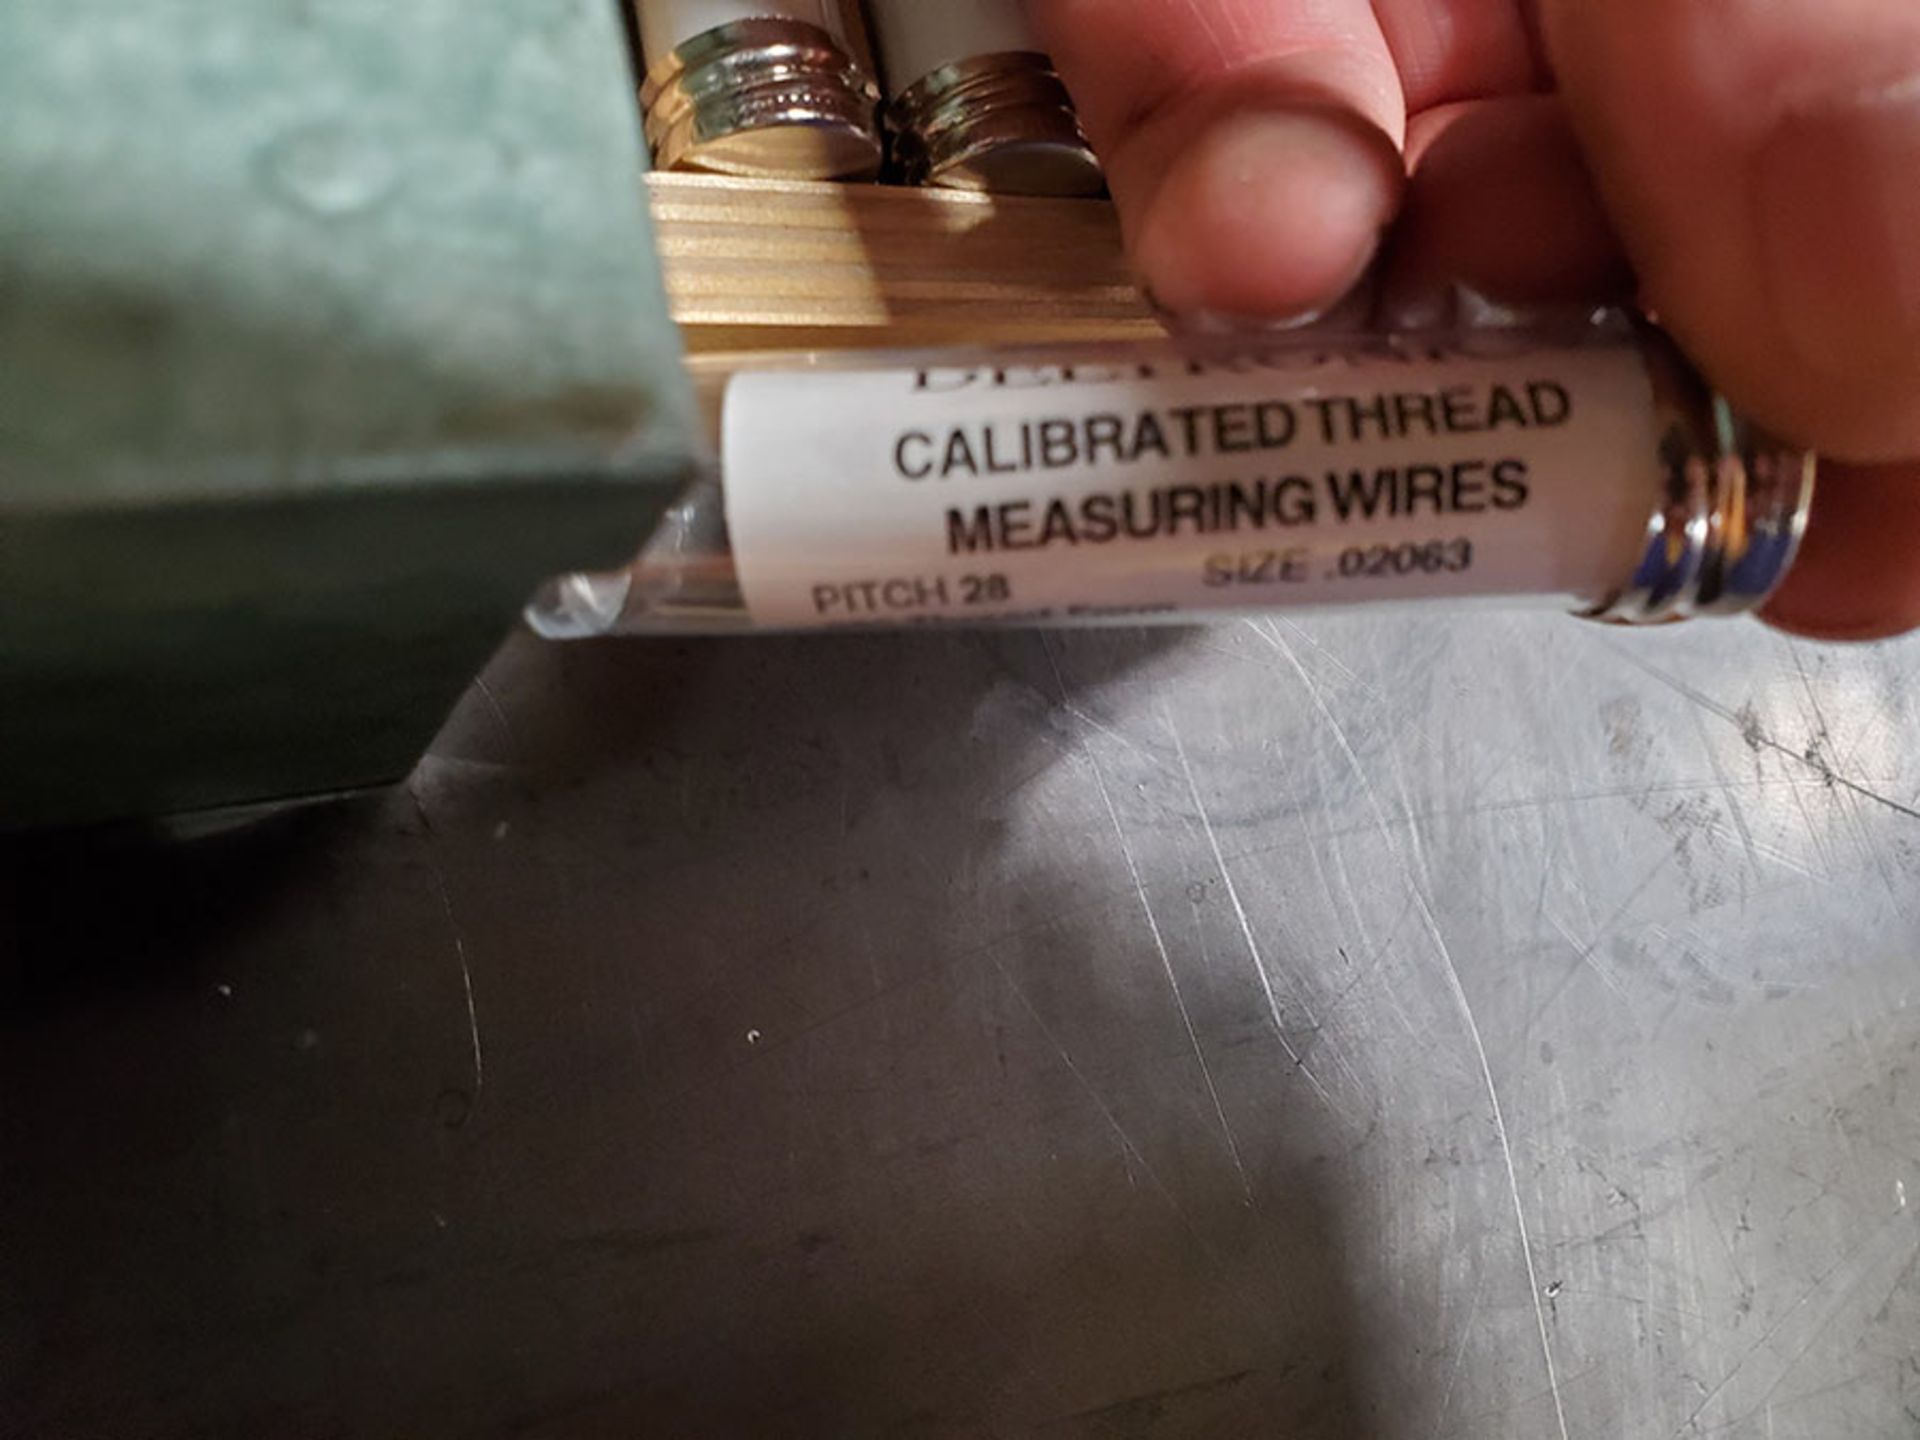 LOT OF DELTRONIC CALIBRATED THREAD MEASURING WIRES - Image 2 of 8